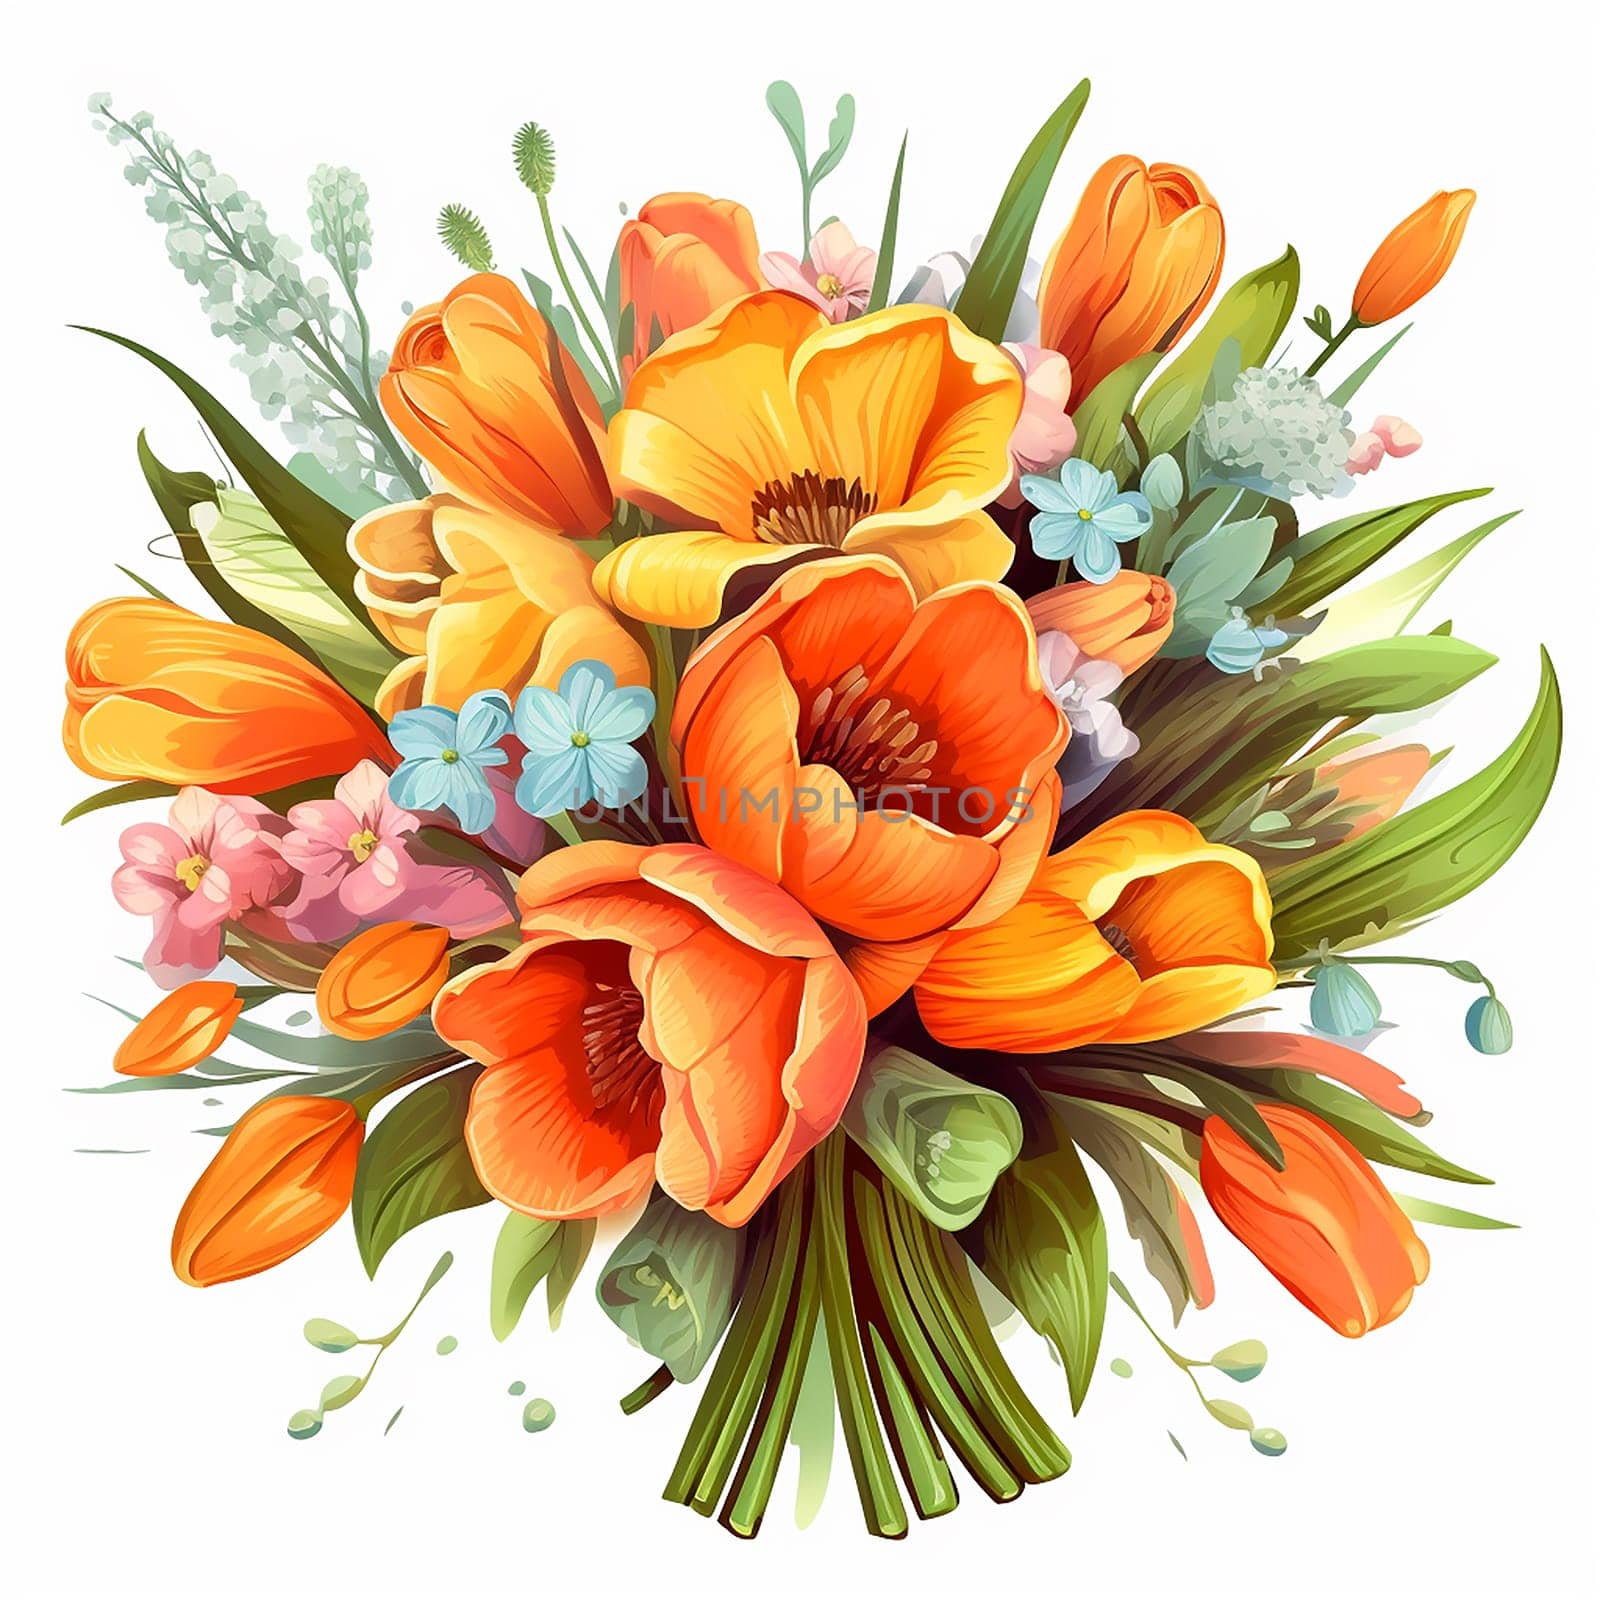 Illustration of a vibrant bouquet with various flowers and foliage. by Hype2art